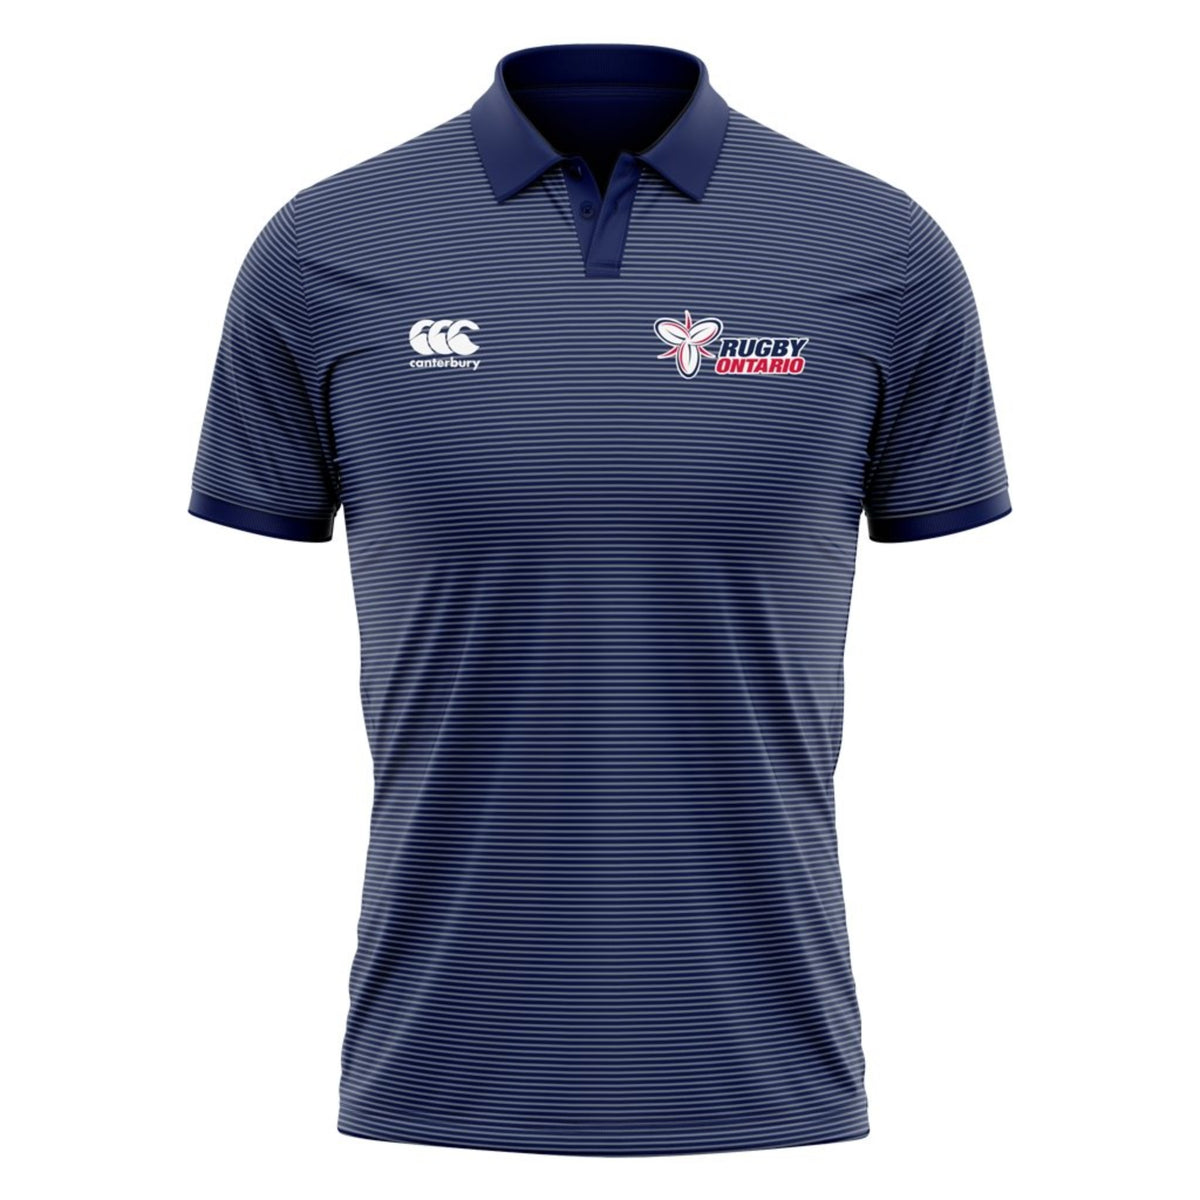 Rugby Ontario CCC Pinstripe Performance Polo - Women&#39;s - www.therugbyshop.com www.therugbyshop.com WOMEN&#39;S / NAVY / W6 TRS Distribution Canada POLO Rugby Ontario CCC Pinstripe Performance Polo - Women&#39;s